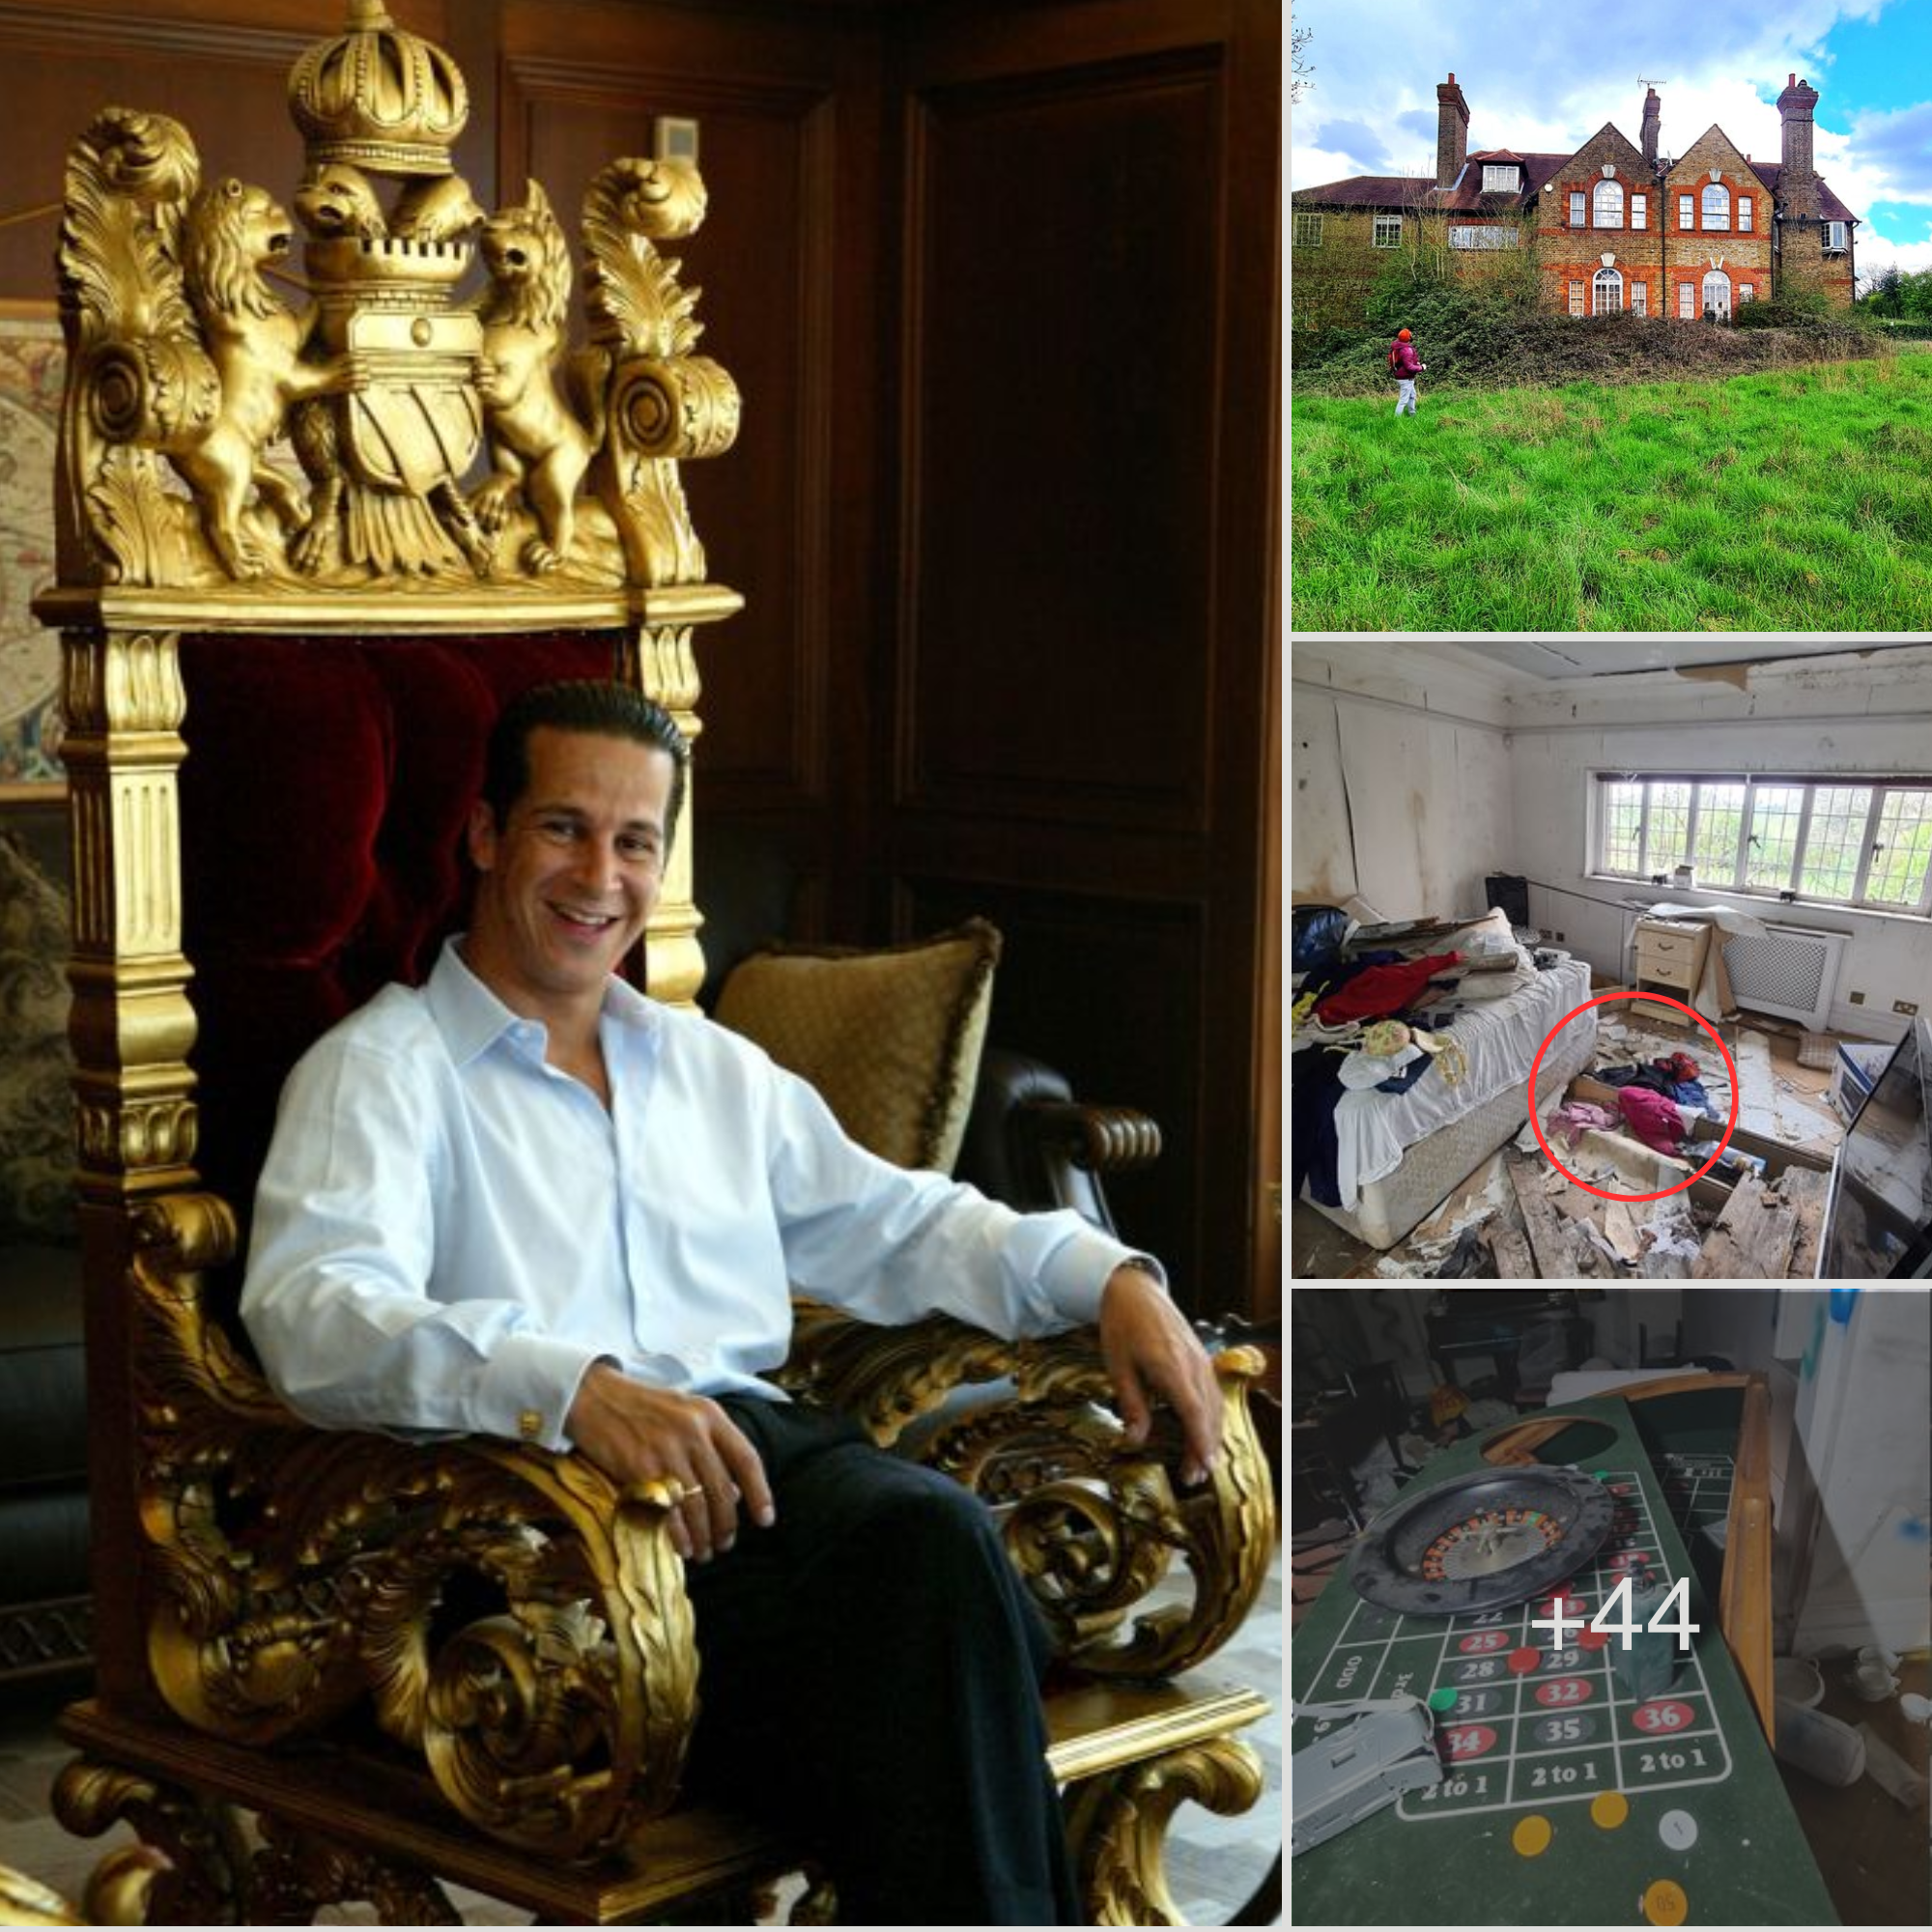 Greek tycoon escaped from this mansion 3 years ago, inside there are many brands and expensive objects